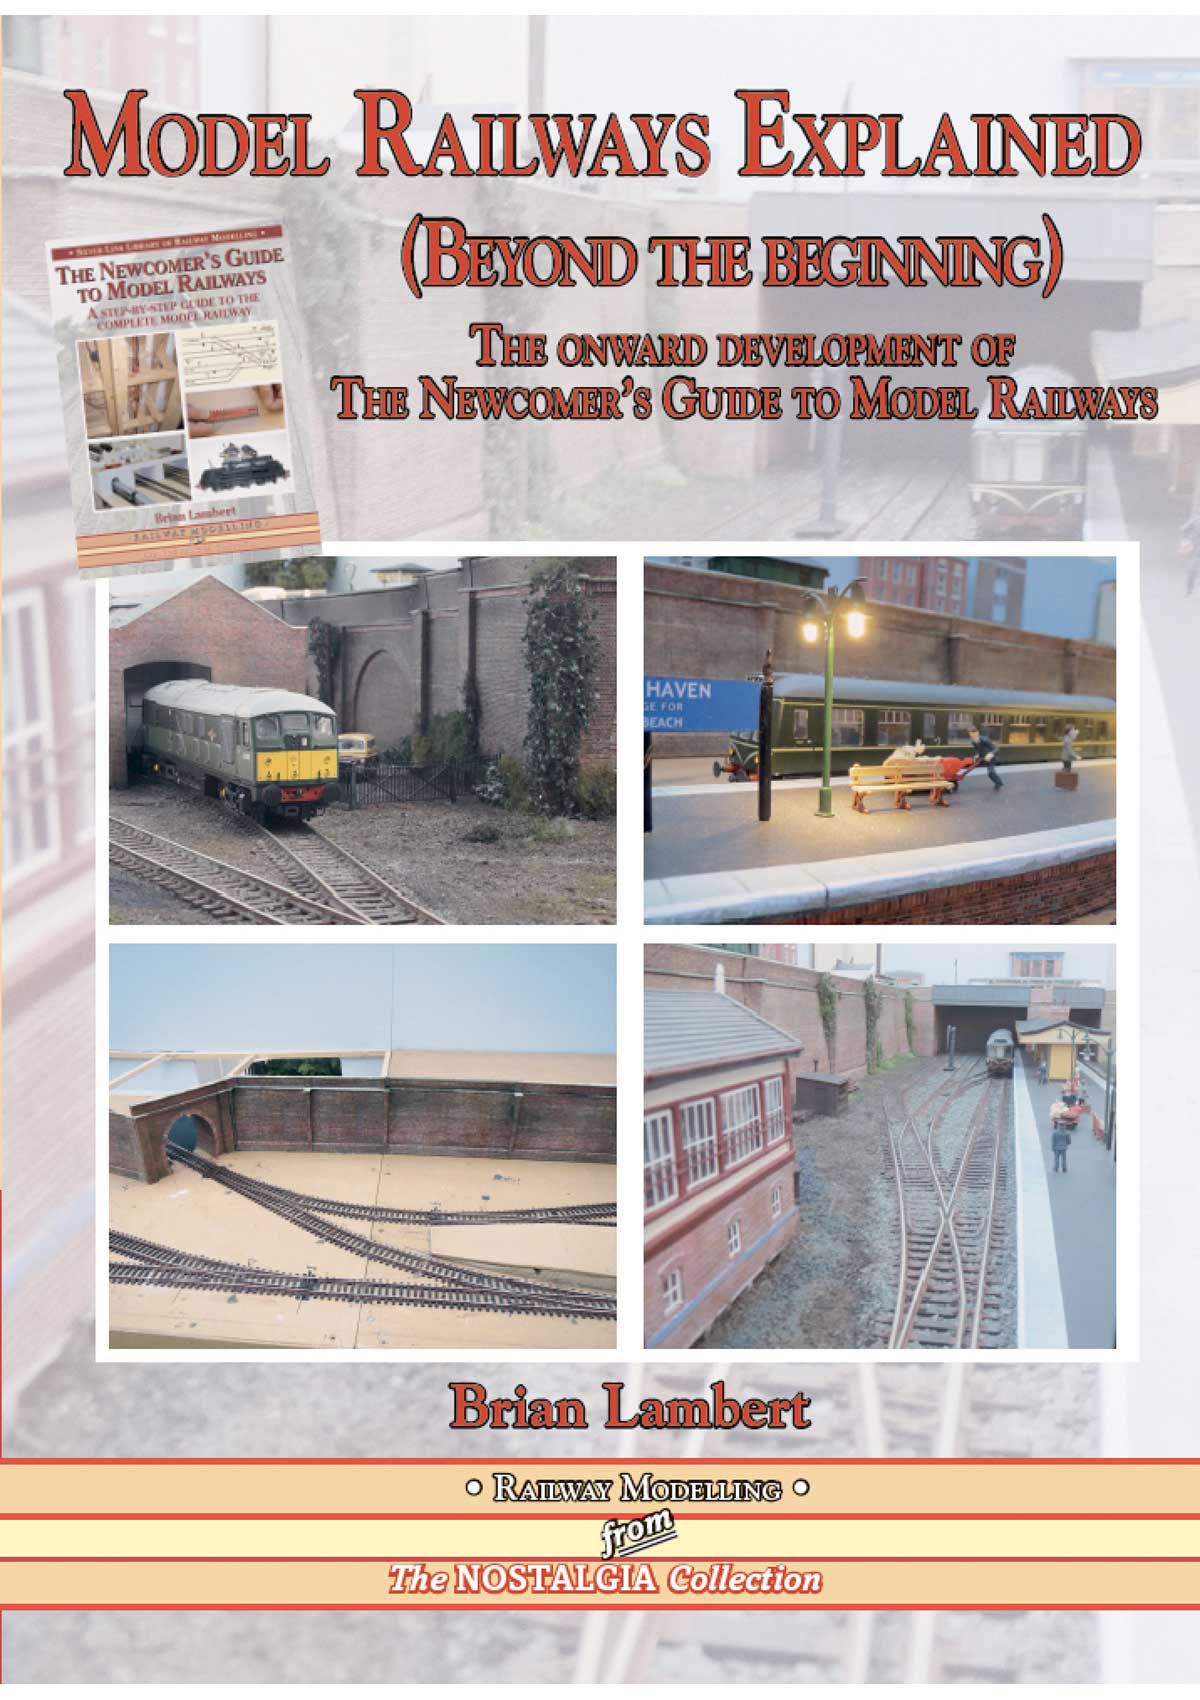 MODEL RAILWAYS EXPLAINED (BEYOND THE BEGINNING) THE ONWARD DEVELOPMENT OF THE NEWCOMERS GUIDE TO MODEL RAILWAYS